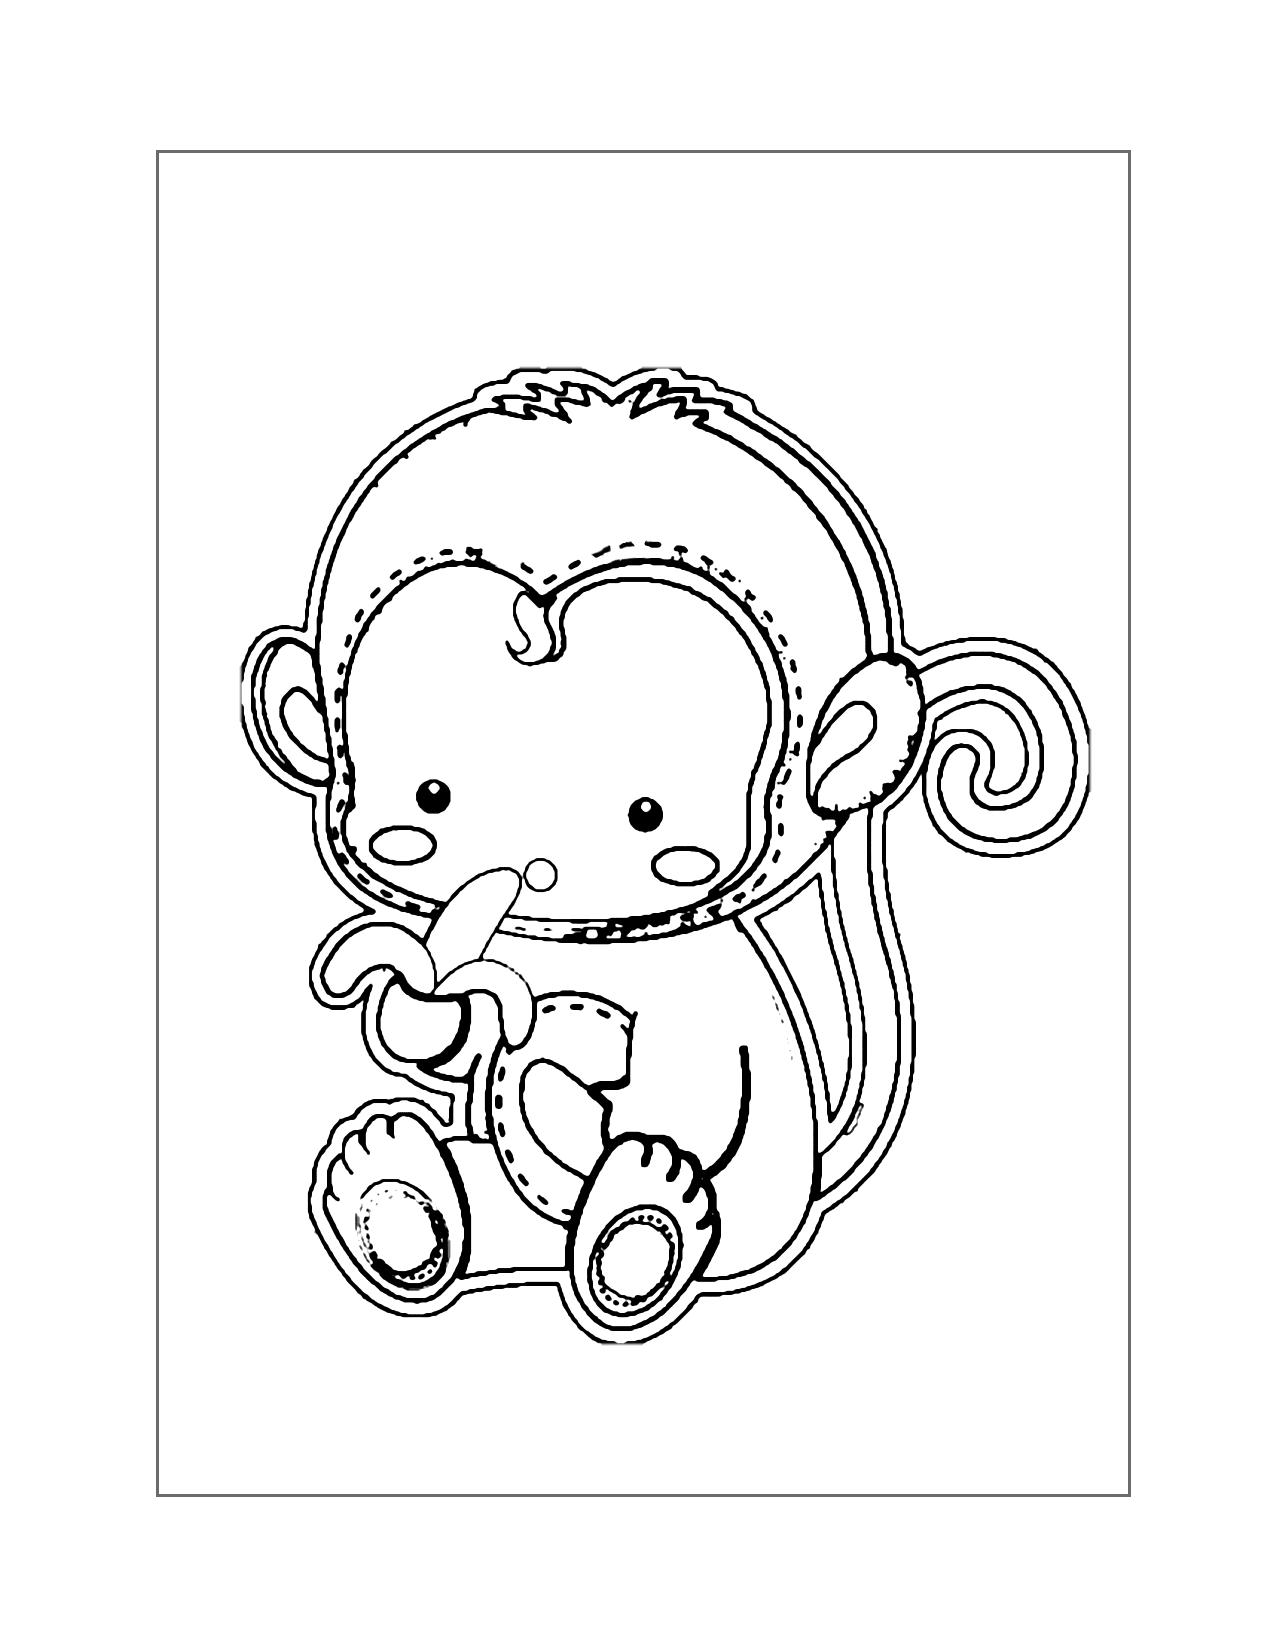 Monkey Doll Coloring Page